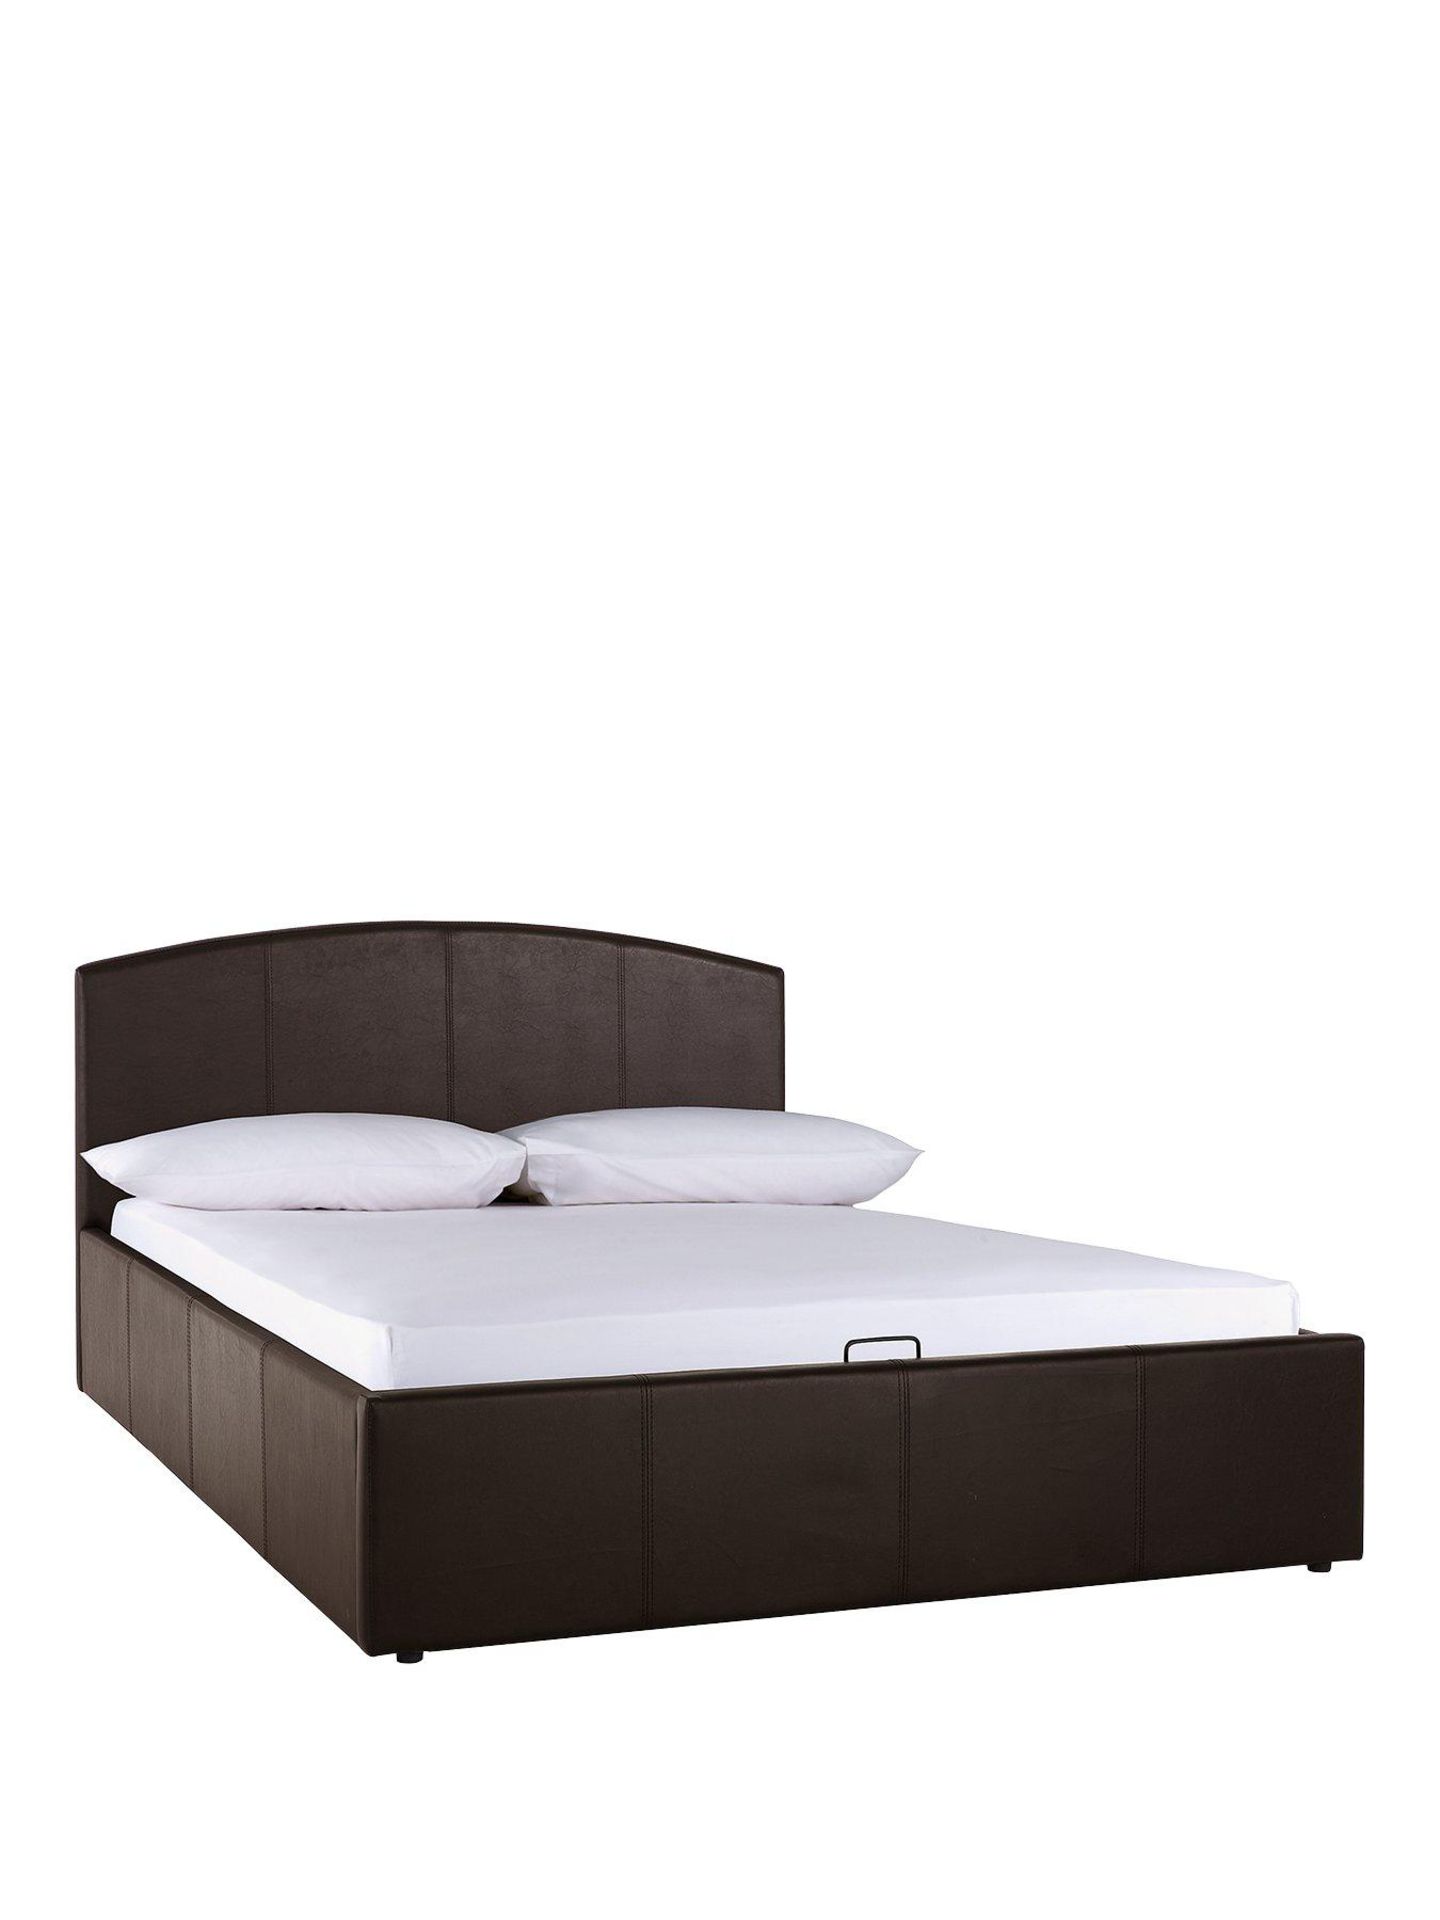 Boxed Item Marston Small Double Lift-Up Bed [Chocolate] 88X128X202Cm rrp, £478.0